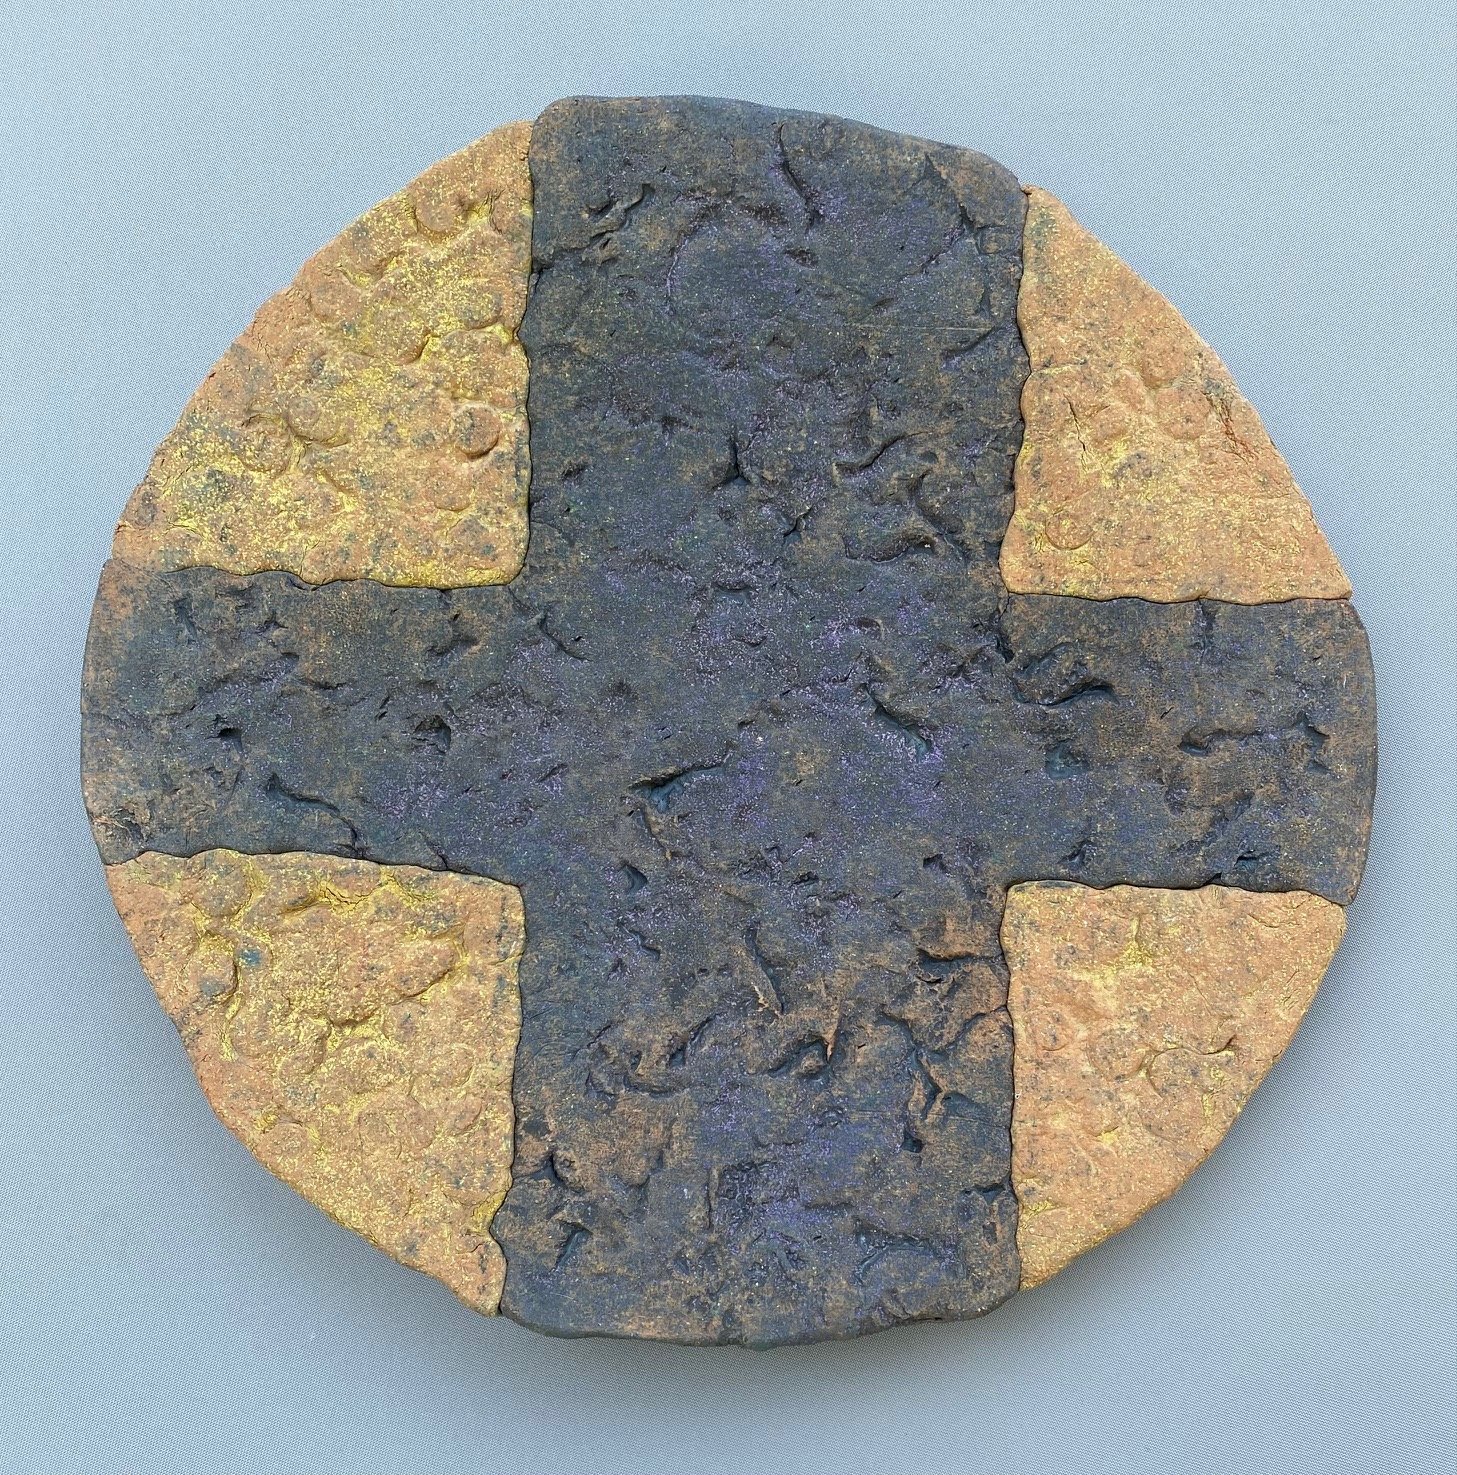 Cross Disk by Ron Michael  earthenware  17 x 17 x 2 inches.jpg